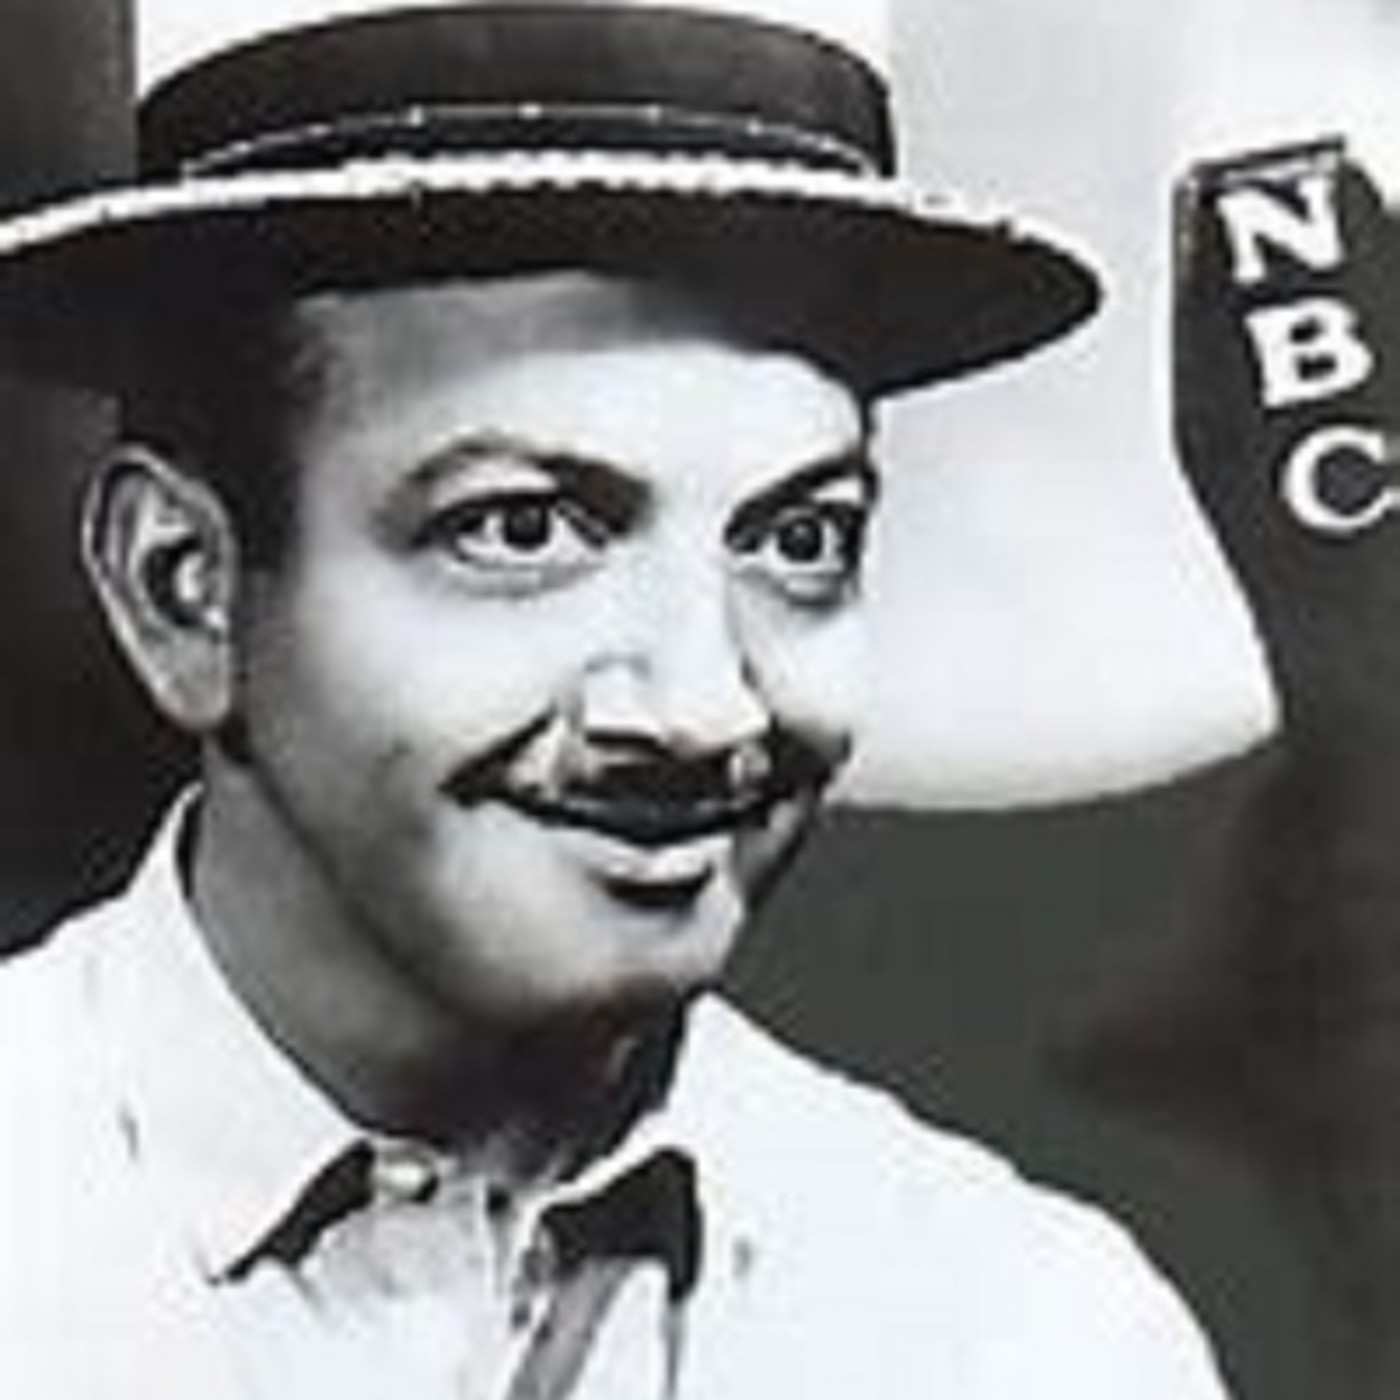 The Mel Blanc Show - The Chinese Philosopher - 061047, episode 41